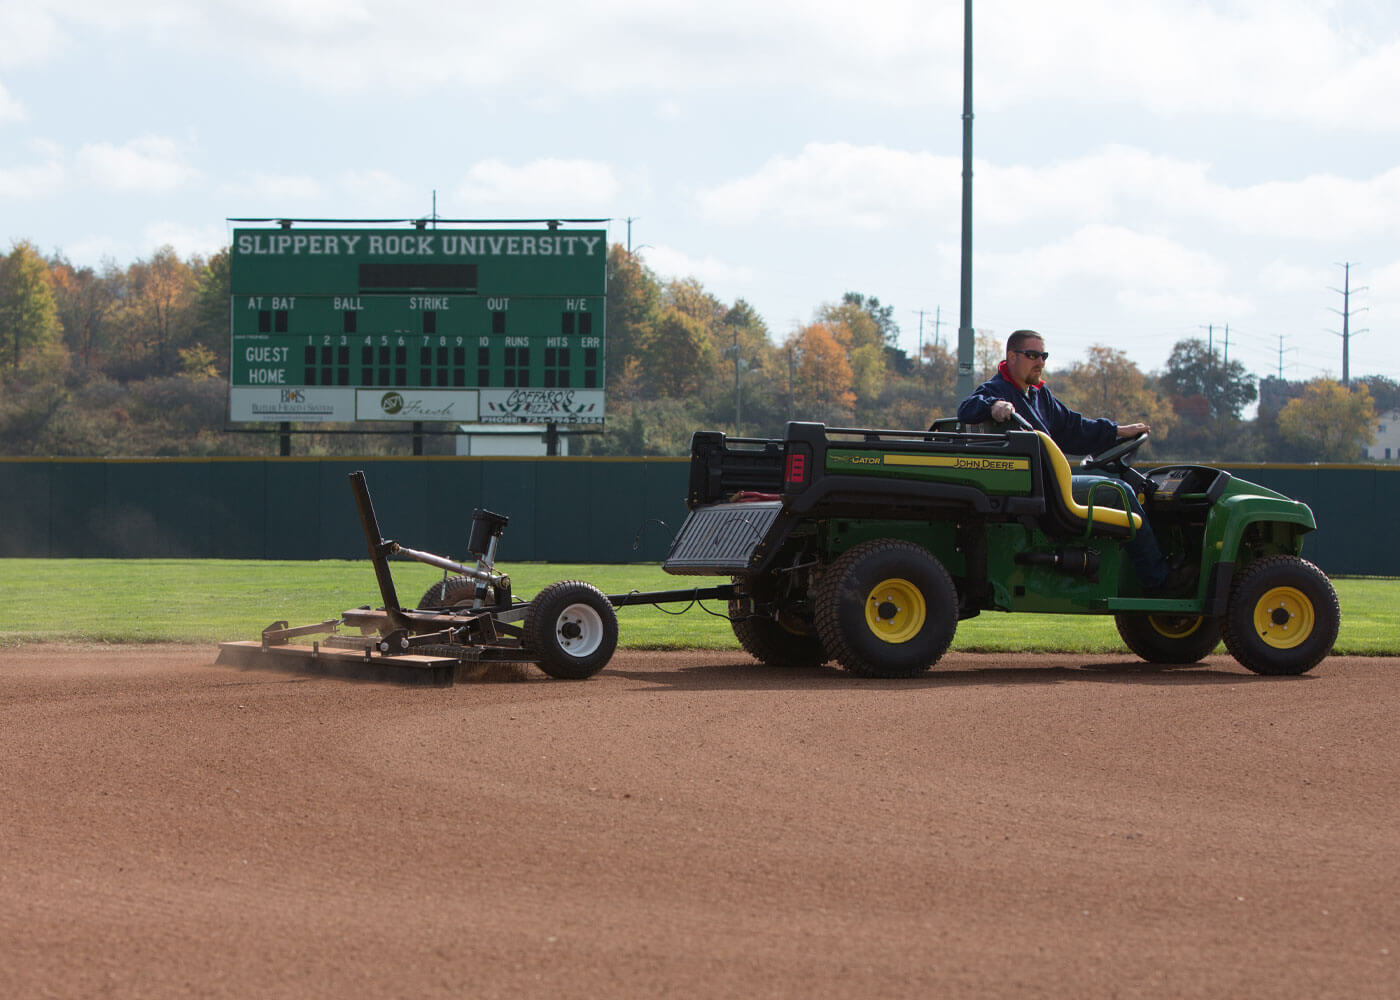 Force infield rascal pro pull-behind infield groomer with final finish broom 